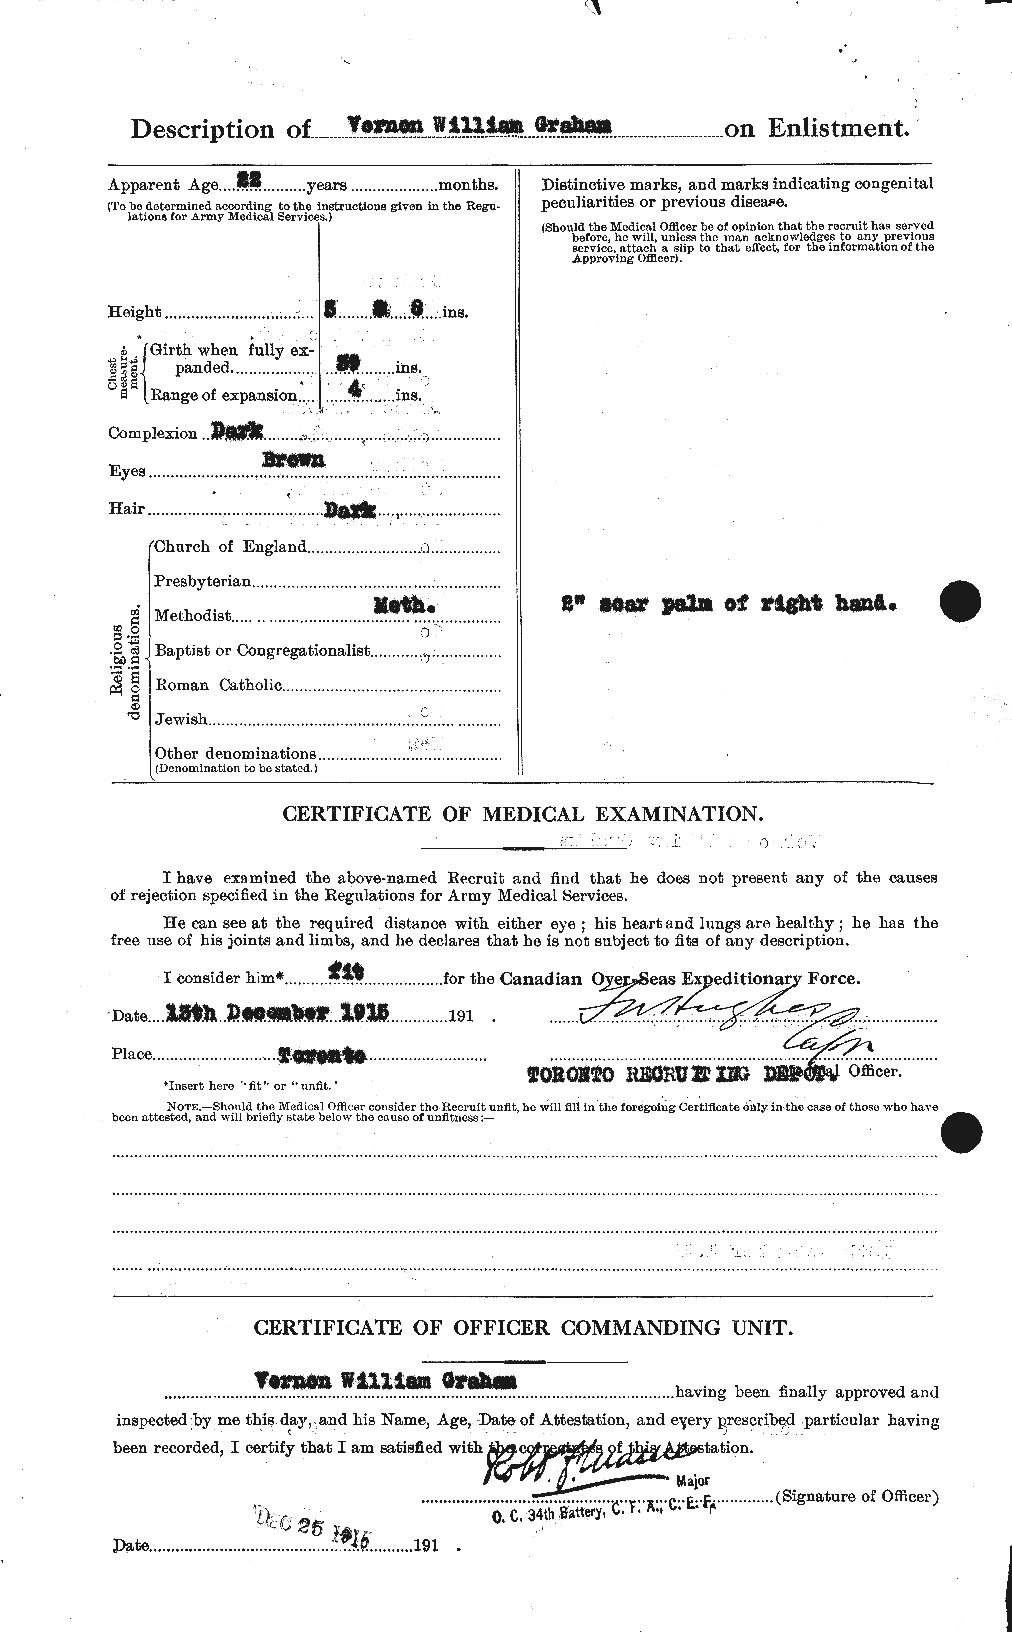 Personnel Records of the First World War - CEF 359536b